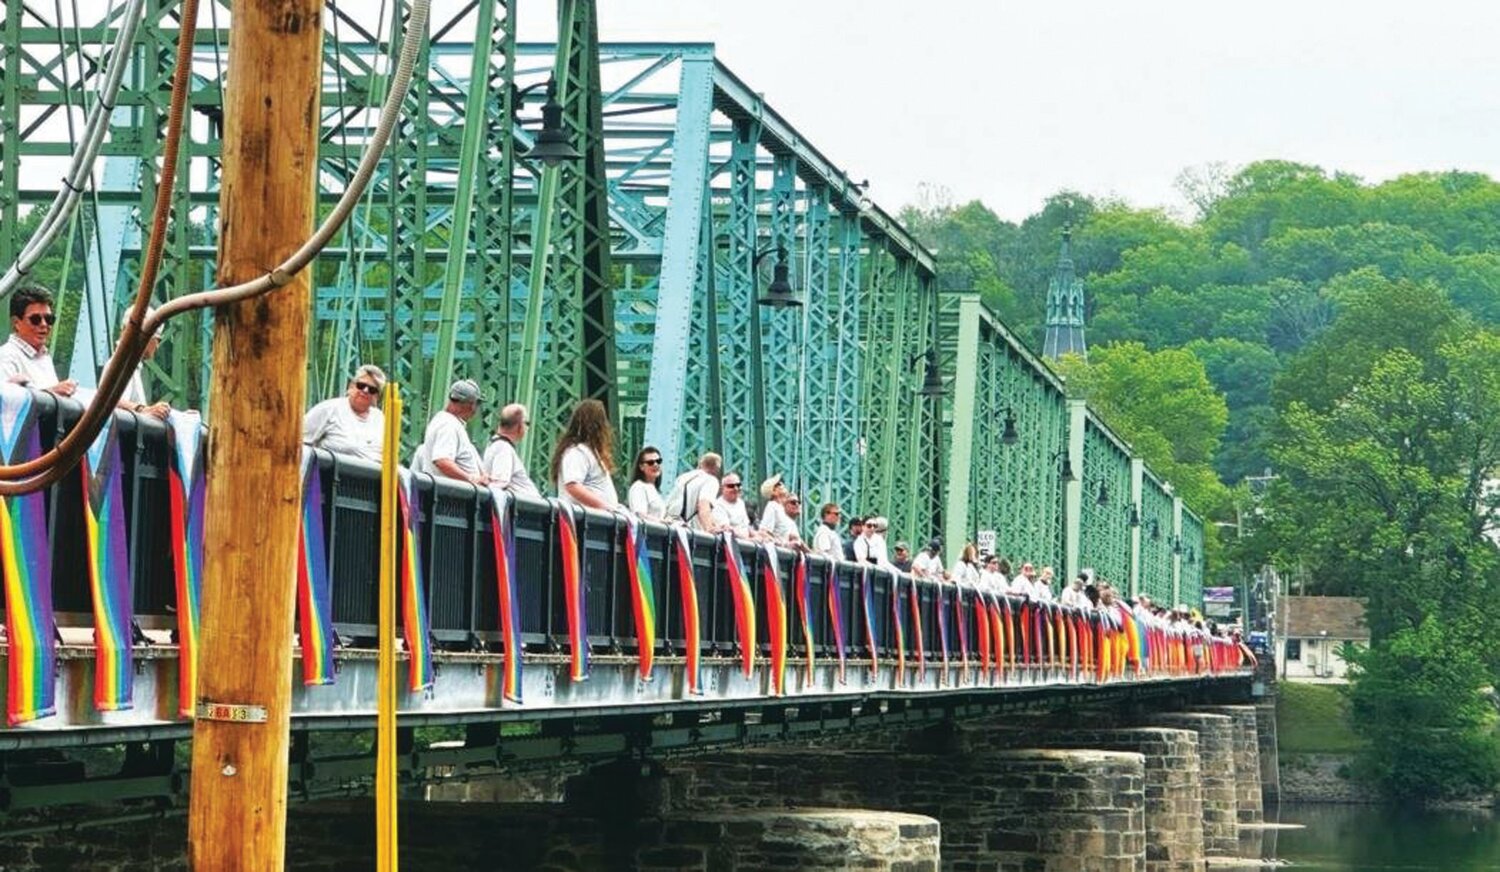 The 119-year-old New Hope-Lambertville Toll-Supported Bridge is undergoing its first rehabilitation since 2004 this year. The work will include repairs, repainting, replacement of the pedestrian walkway and installation of an LED lighting system.